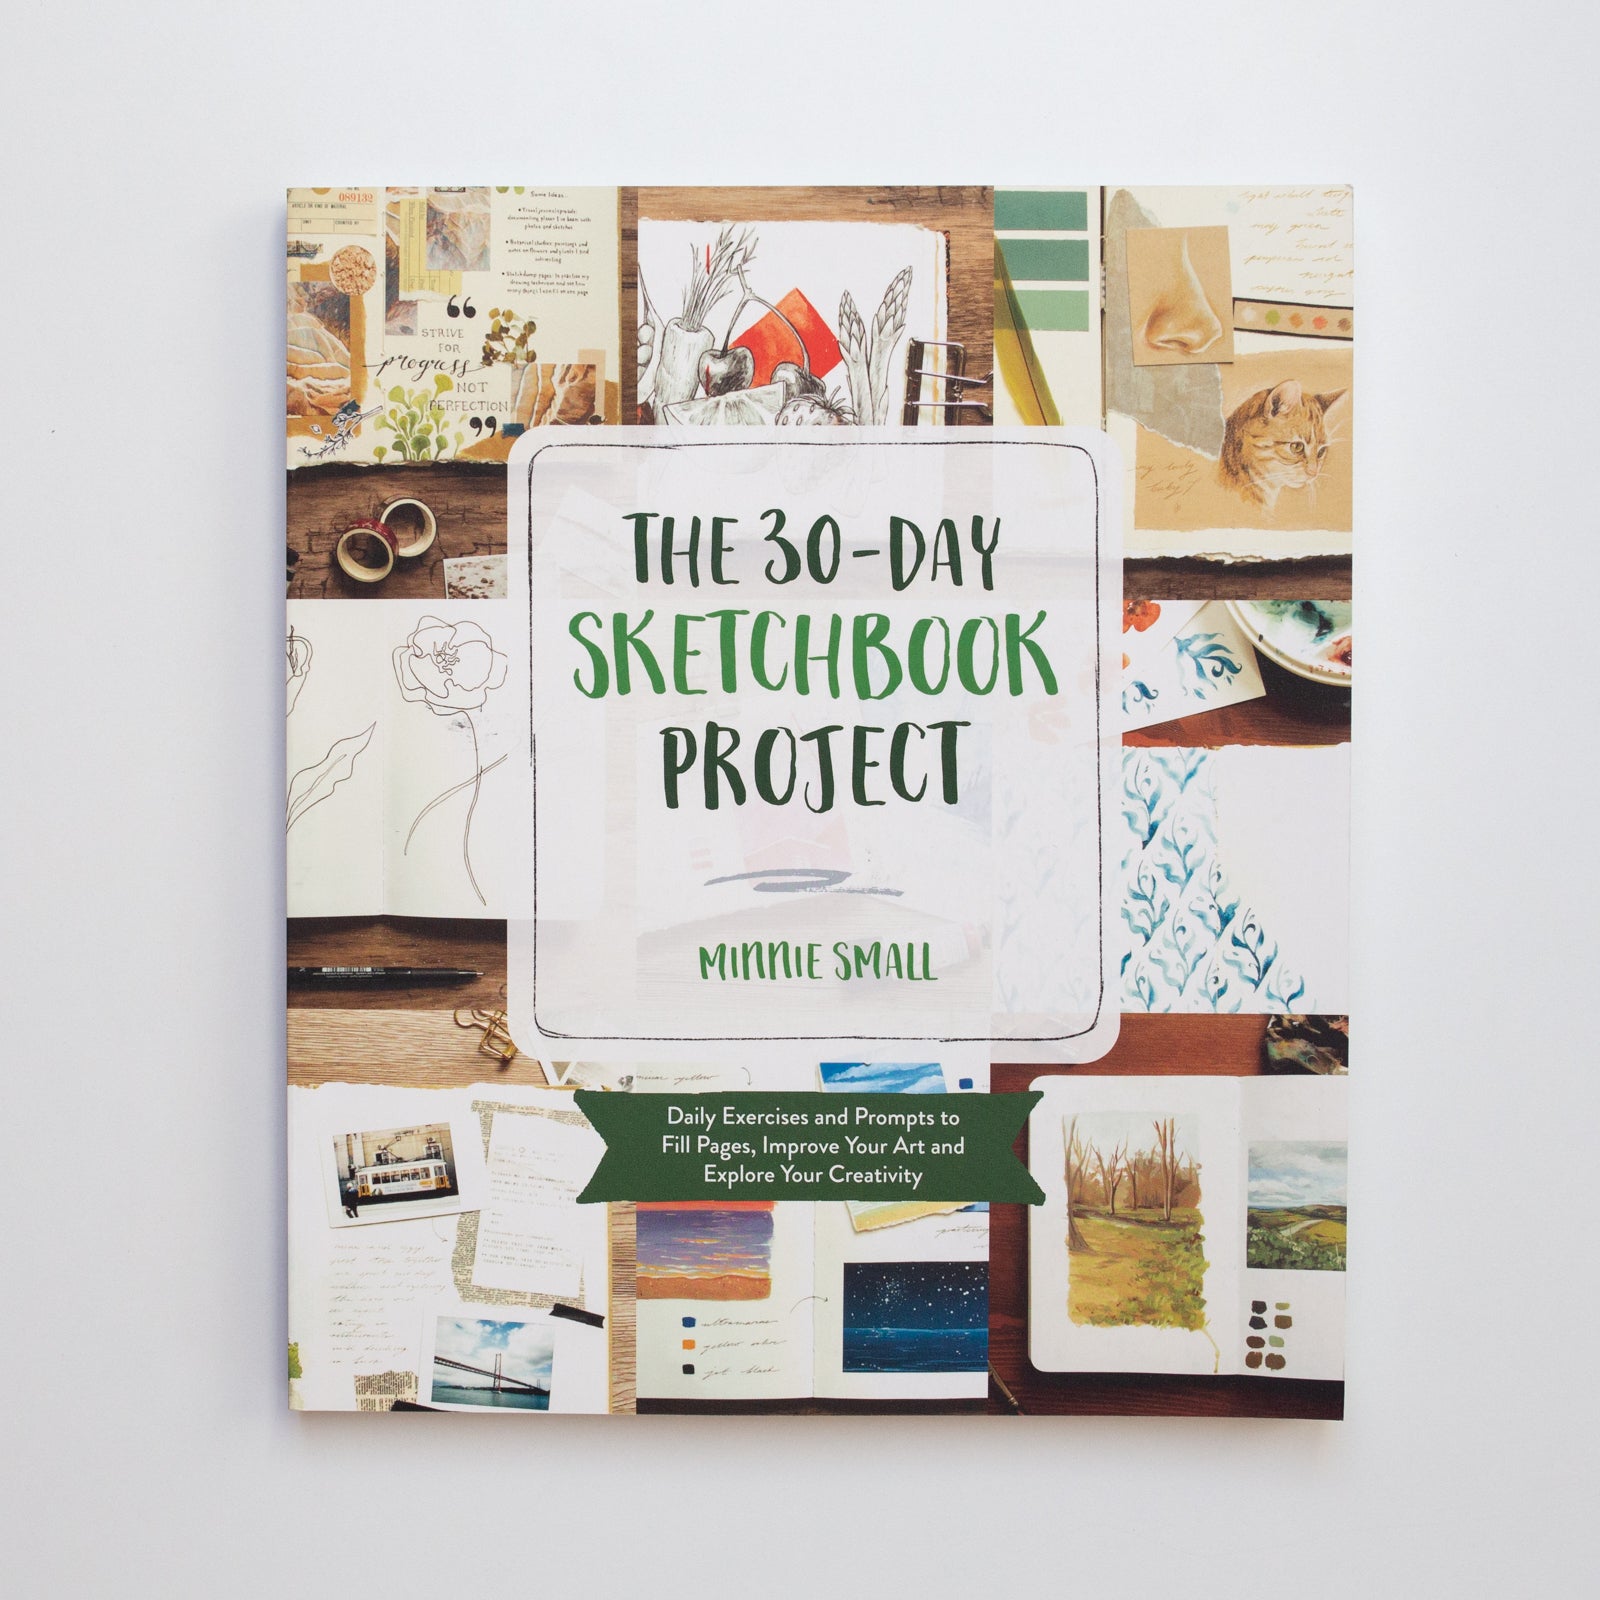 The 30 day sketchbook project by Minnie Small